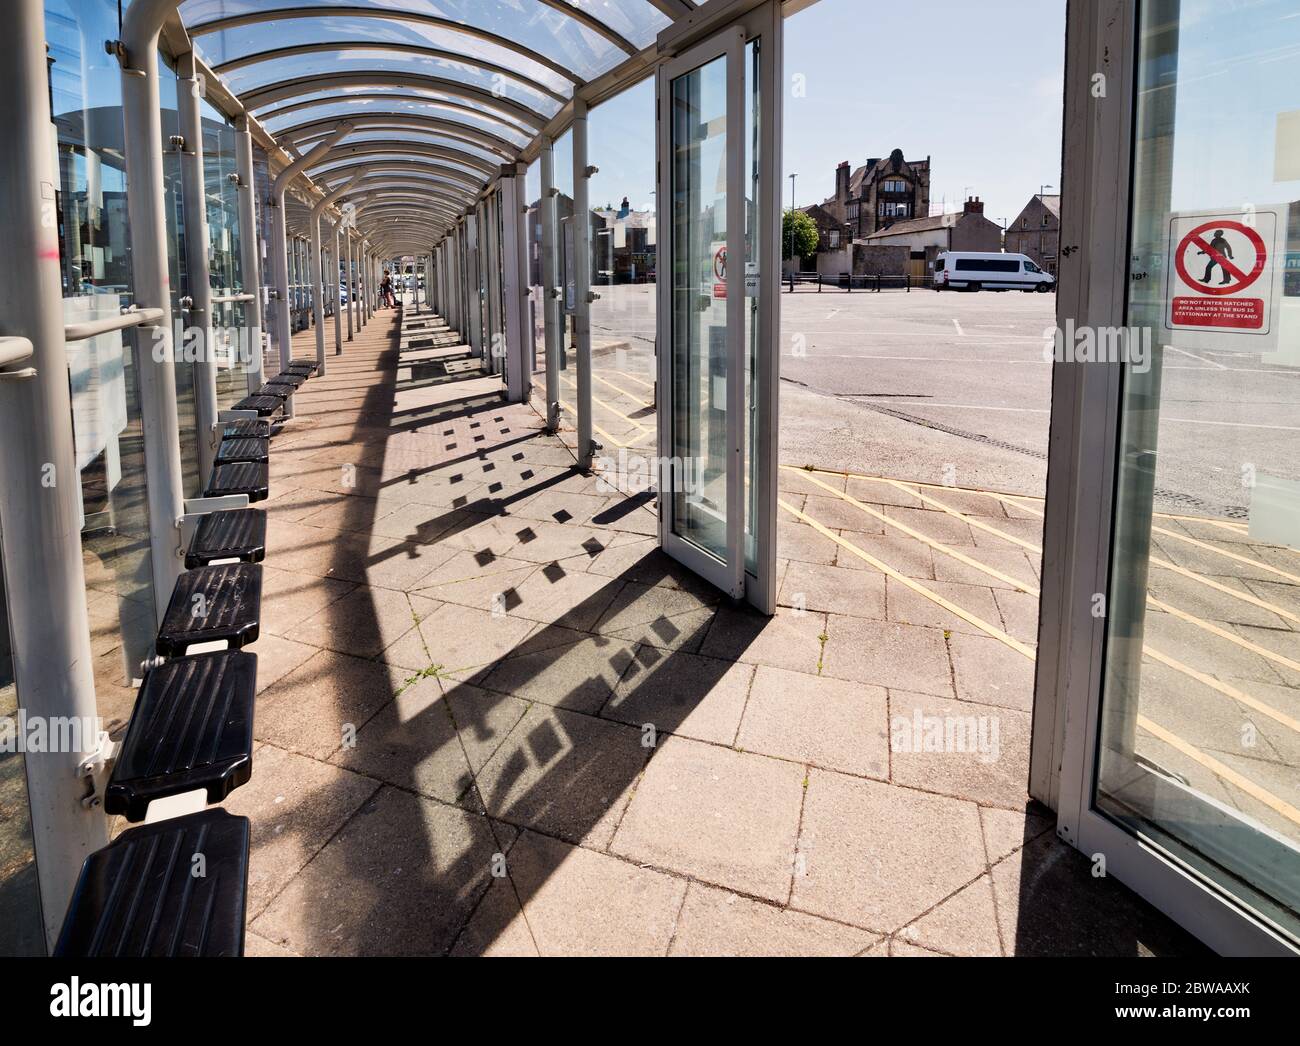 A largely deserted bus station during Covid-19 lockdown, Skipton, North Yorkshire. Stock Photo